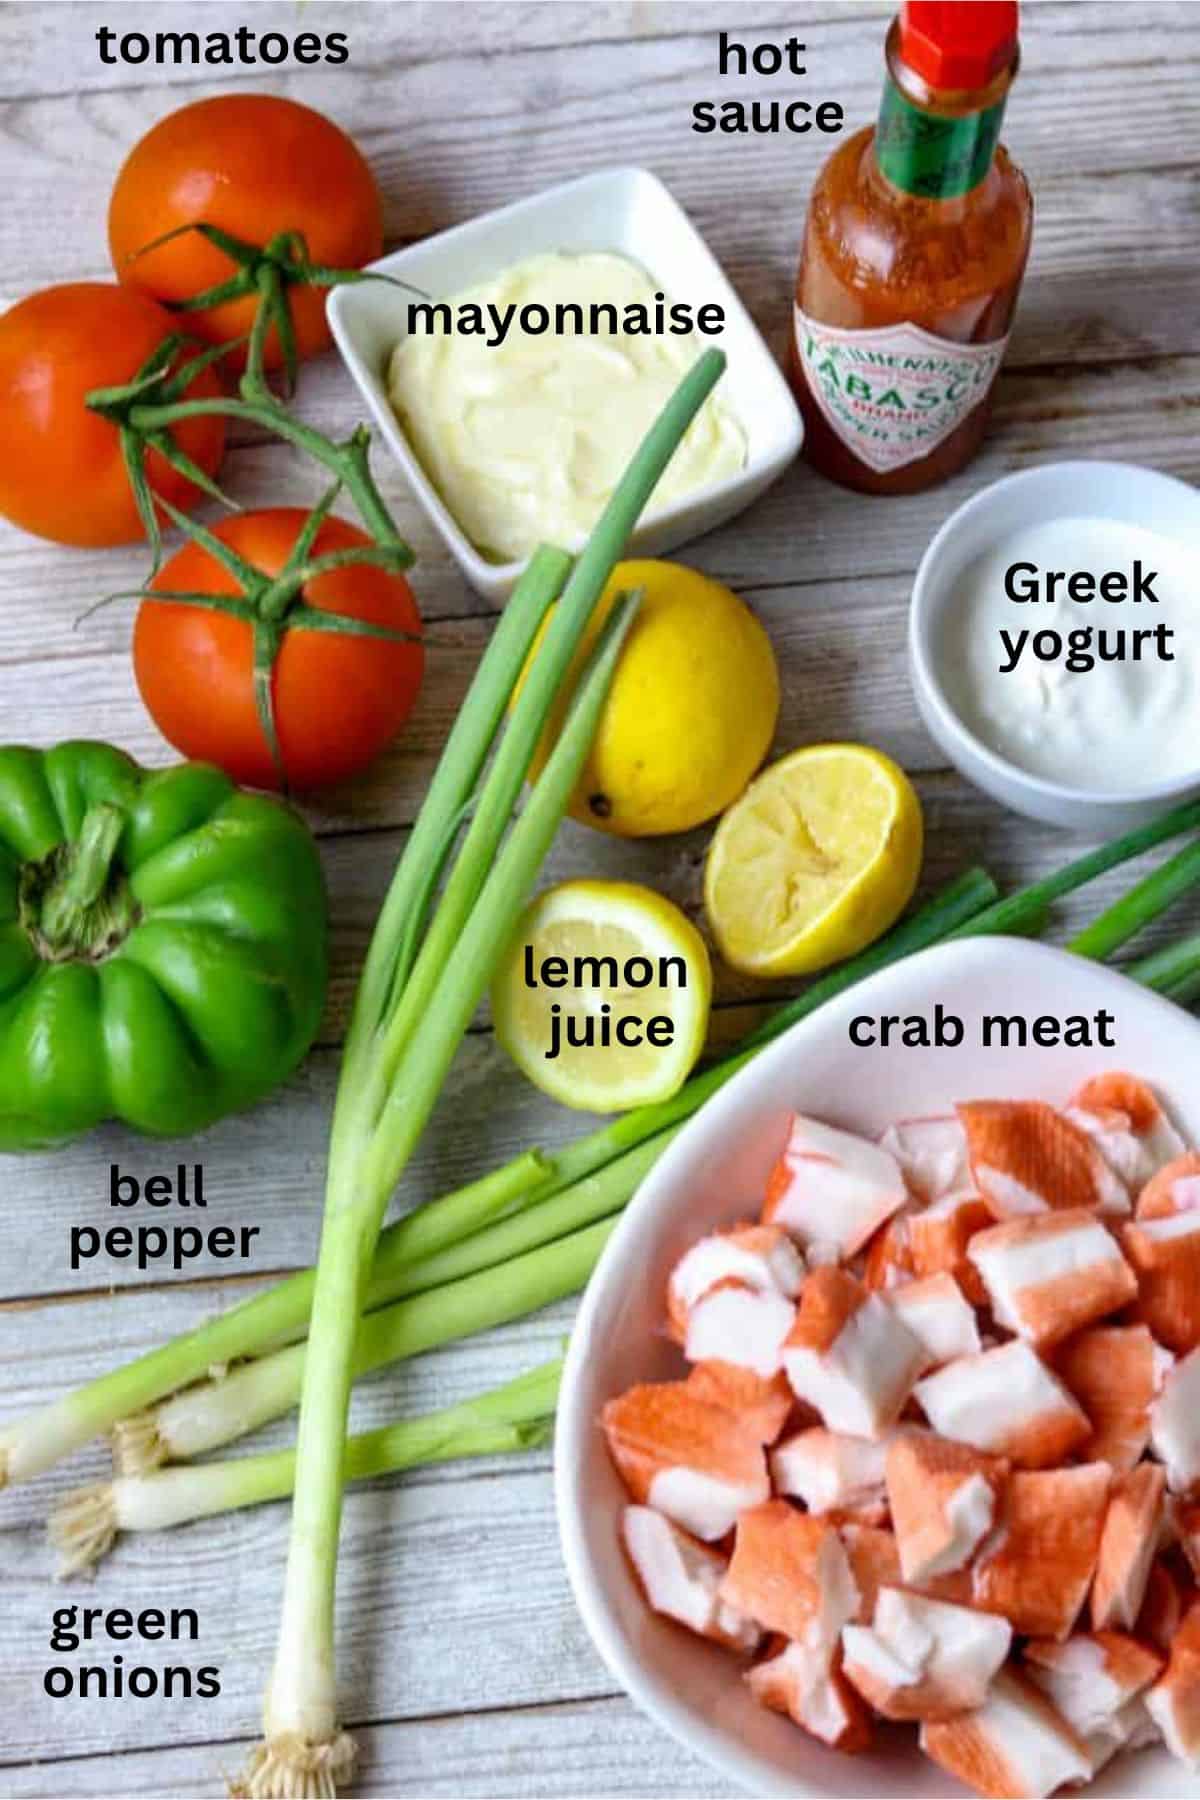 Ingredients for a Crab Salad.